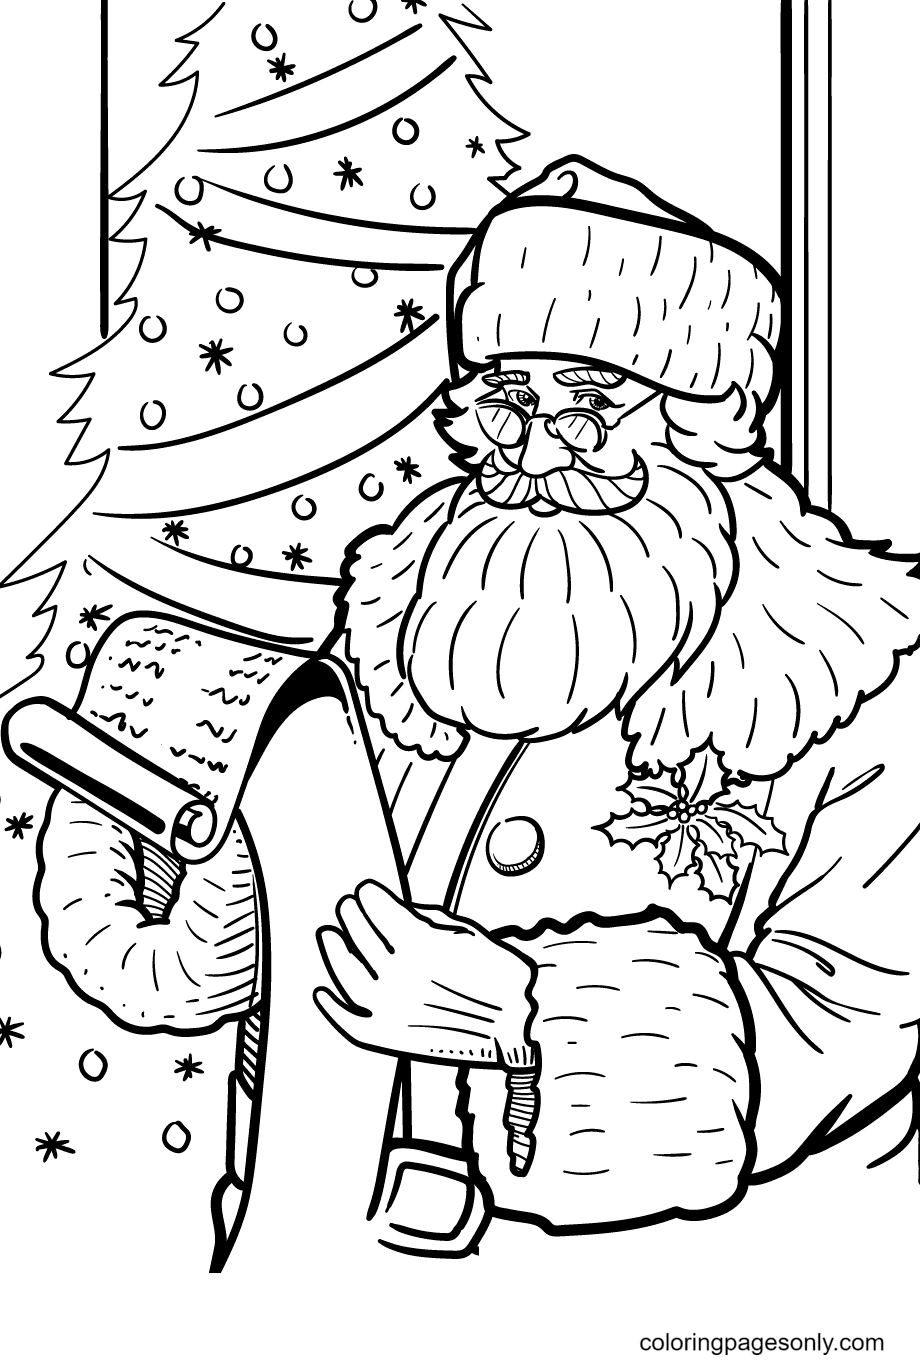 Santa Claus is Checking the Gift List Coloring Pages